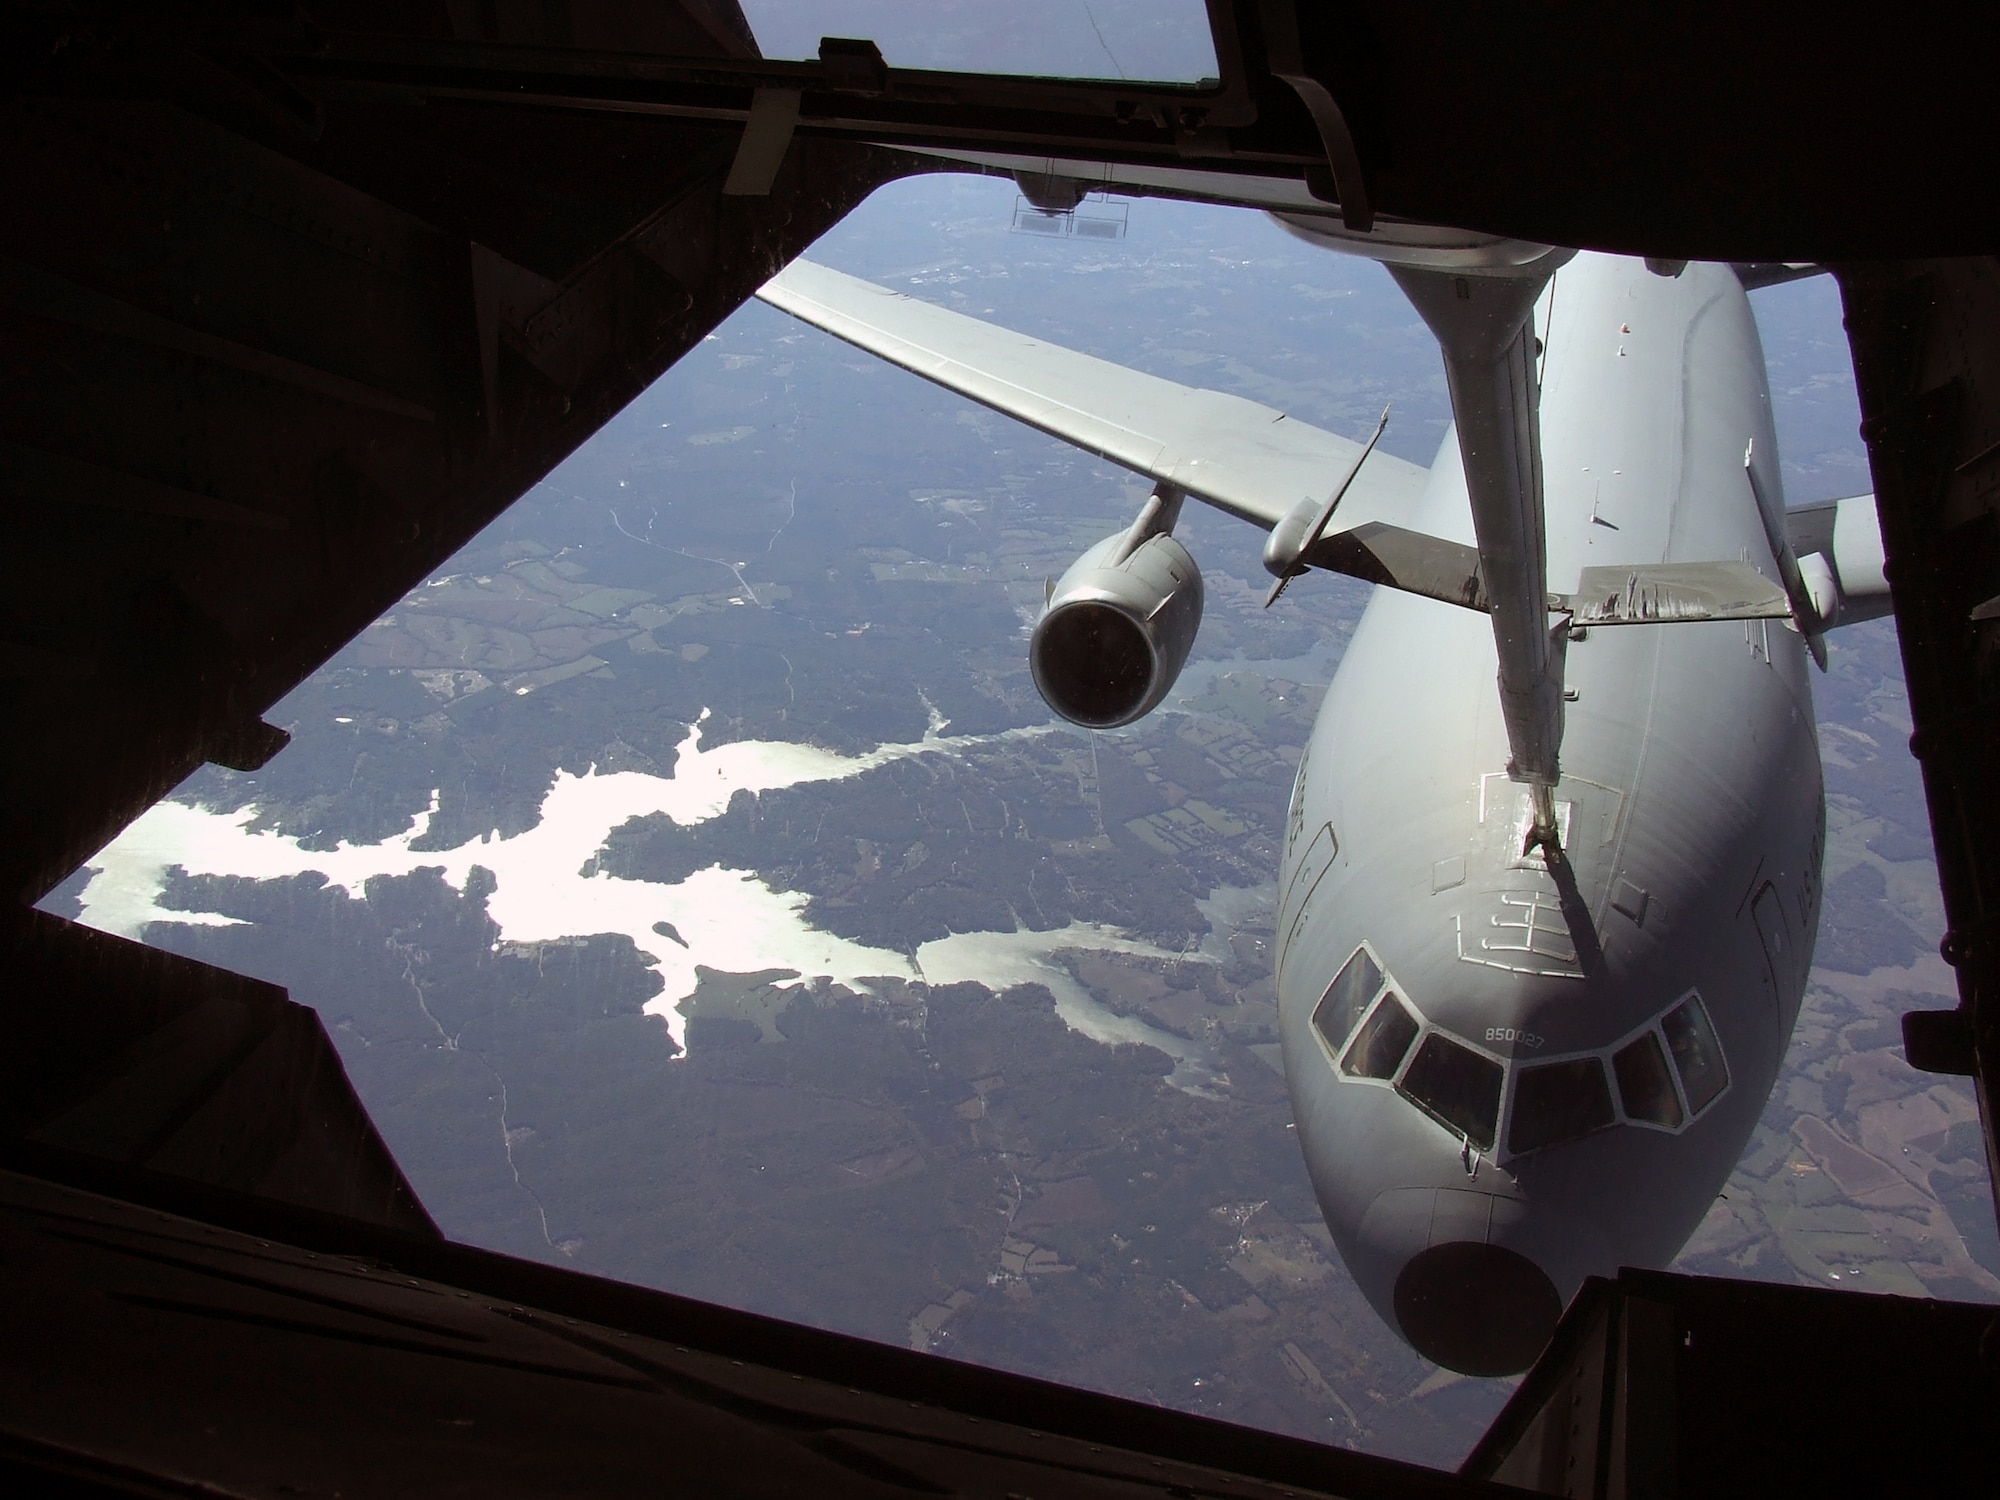 (1727 ZULU) A KC-10 Extender from McGuire Air Force Base, N.J., is refueled by another KC-10 from McGuire during a mission somewhere over the Eastern United States Oct. 28, 2007.  (U.S. Air Force Photo/Tech. Sgt. Scott T. Sturkol)